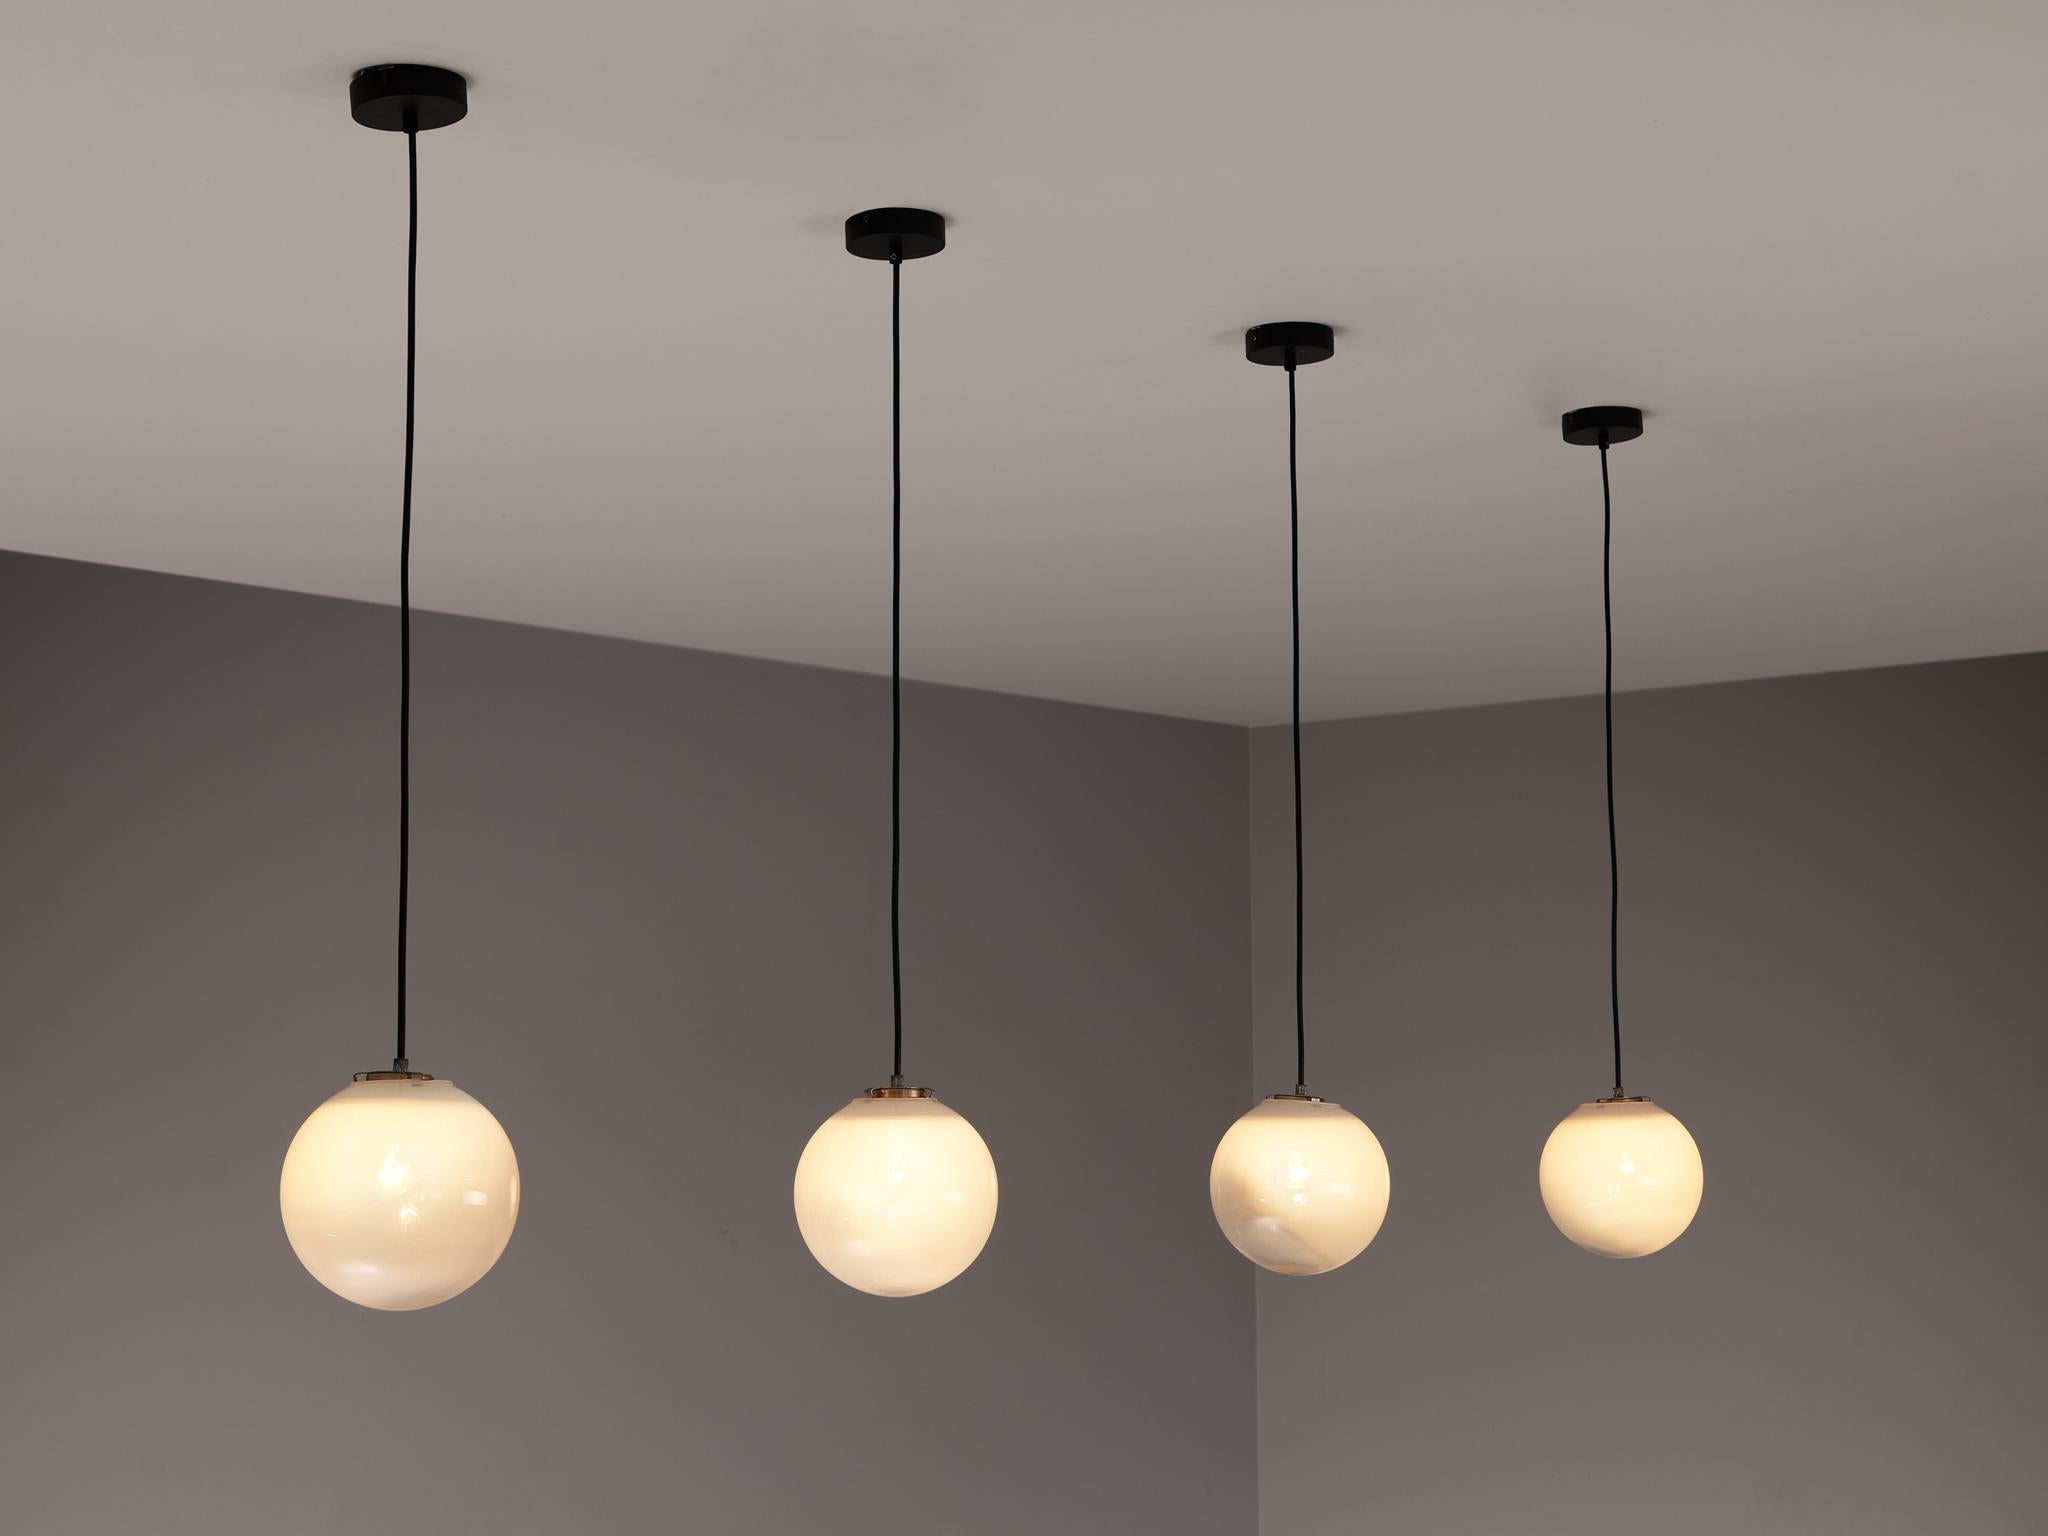 Pendants, glass, metal, plastic, Europe, 1960s.

These atmospheric pendant lamps features each an opaque to clear glass orb. This results in a nice and soft light-tone creating a lively ambience in the room. The lamps can be hung above a large